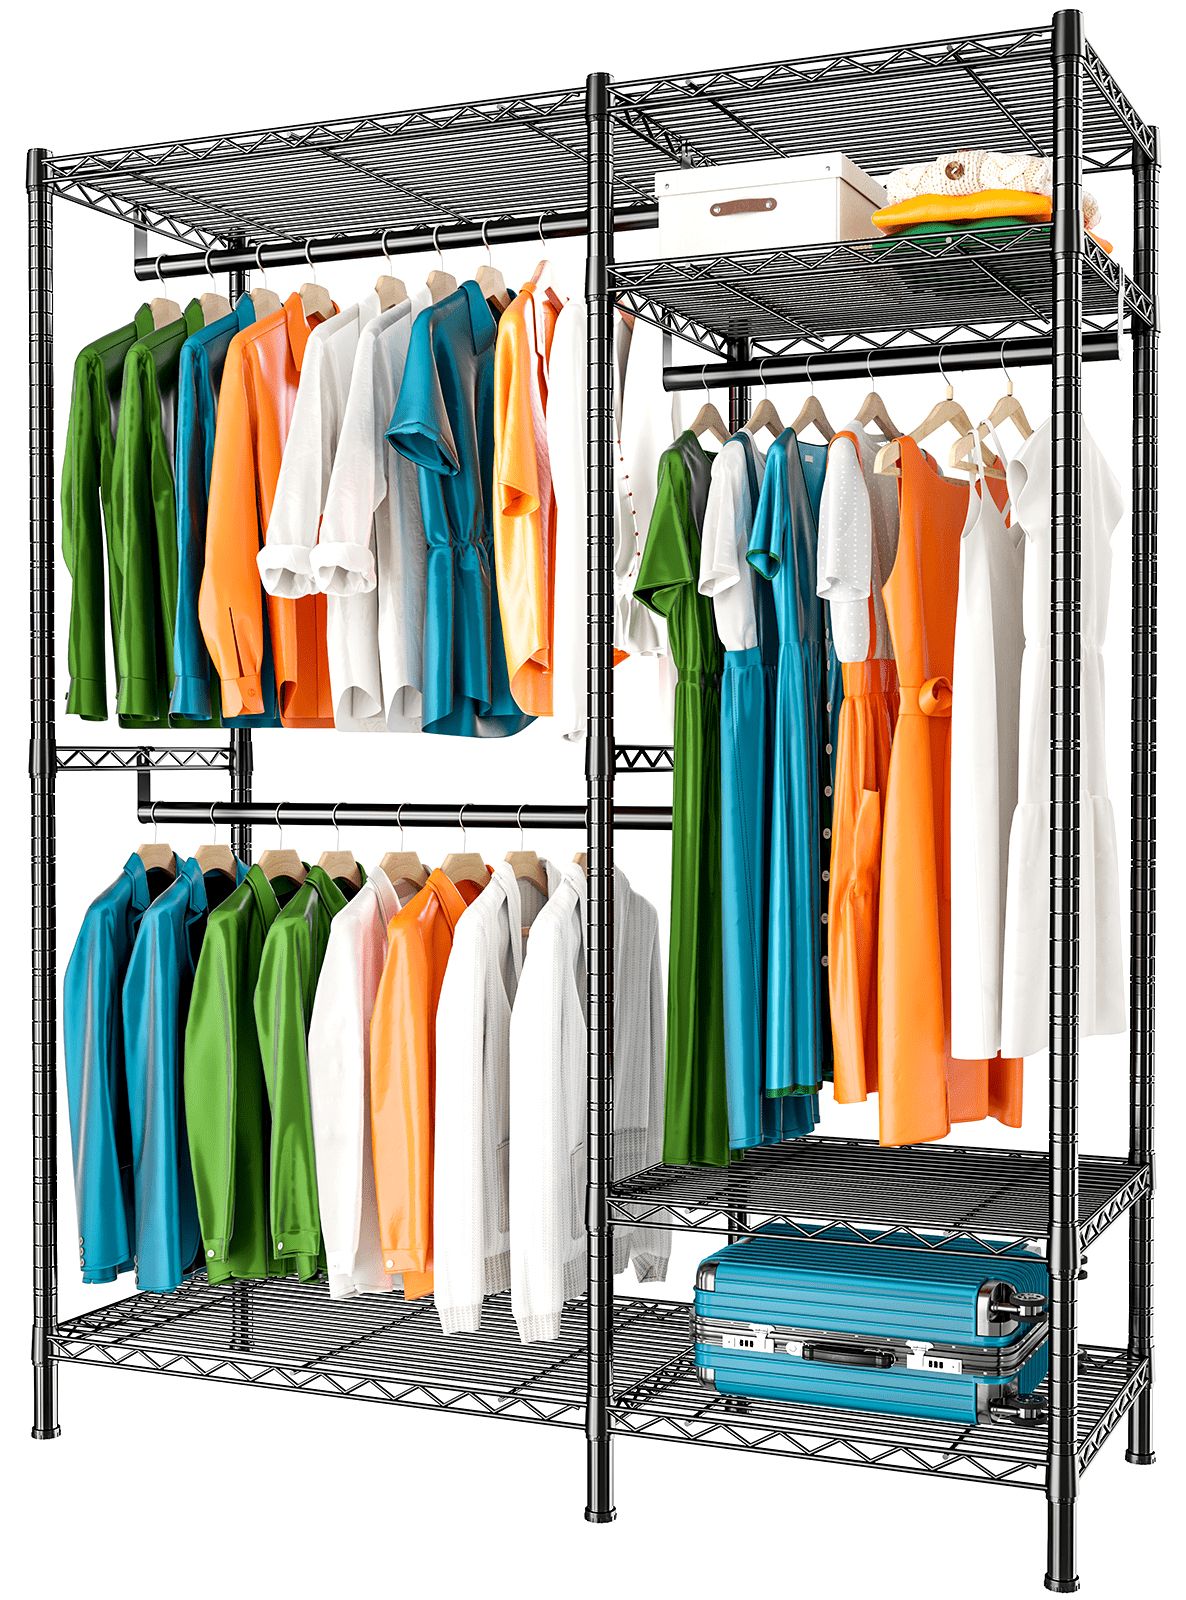 Current Raybee 77" Clothes Rack Wire Garment Rack Metal Closet Rack With Shelves  Loads 705lbs Heavy Duty Clothing Rack For Hanging Clothes Freestanding Wardrobe  Closet Organizer, Commercial, Black – Walmart With Regard To Wire Garment Rack Wardrobes (View 3 of 10)